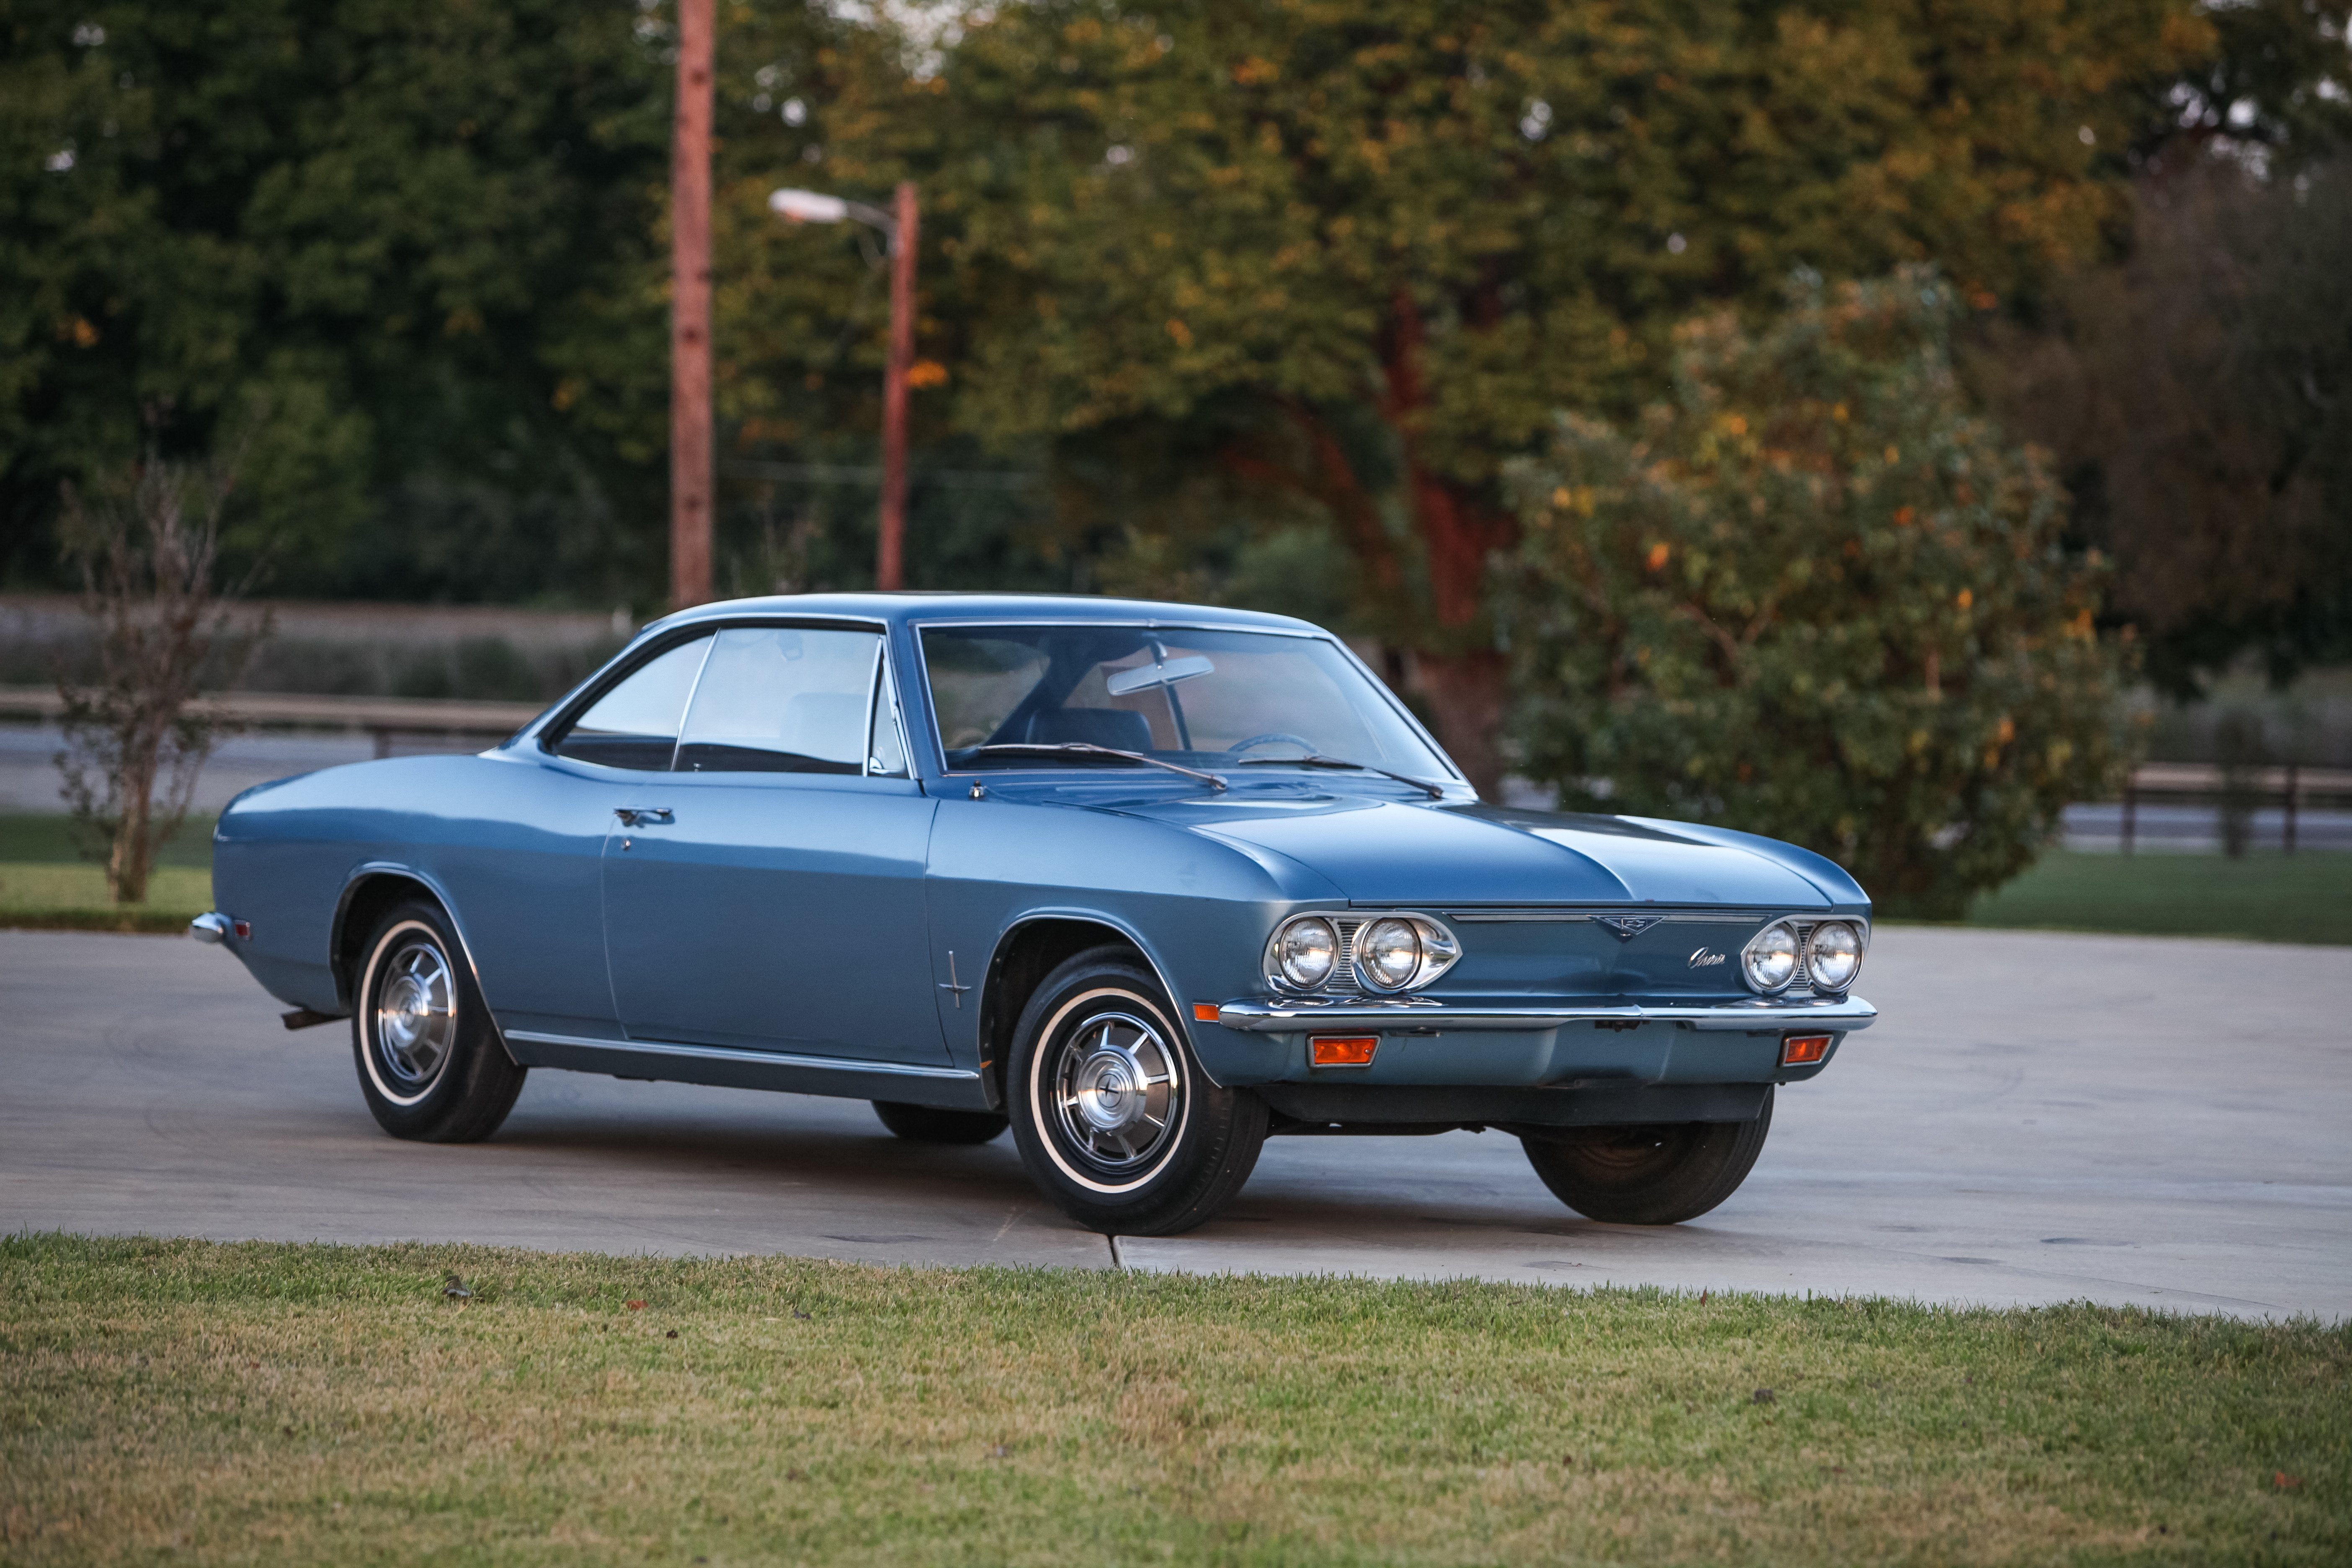 639816-1969-chevrolet-corvair-monza-coupe-compact-classic-usa-d-5616x3744-02.jpg